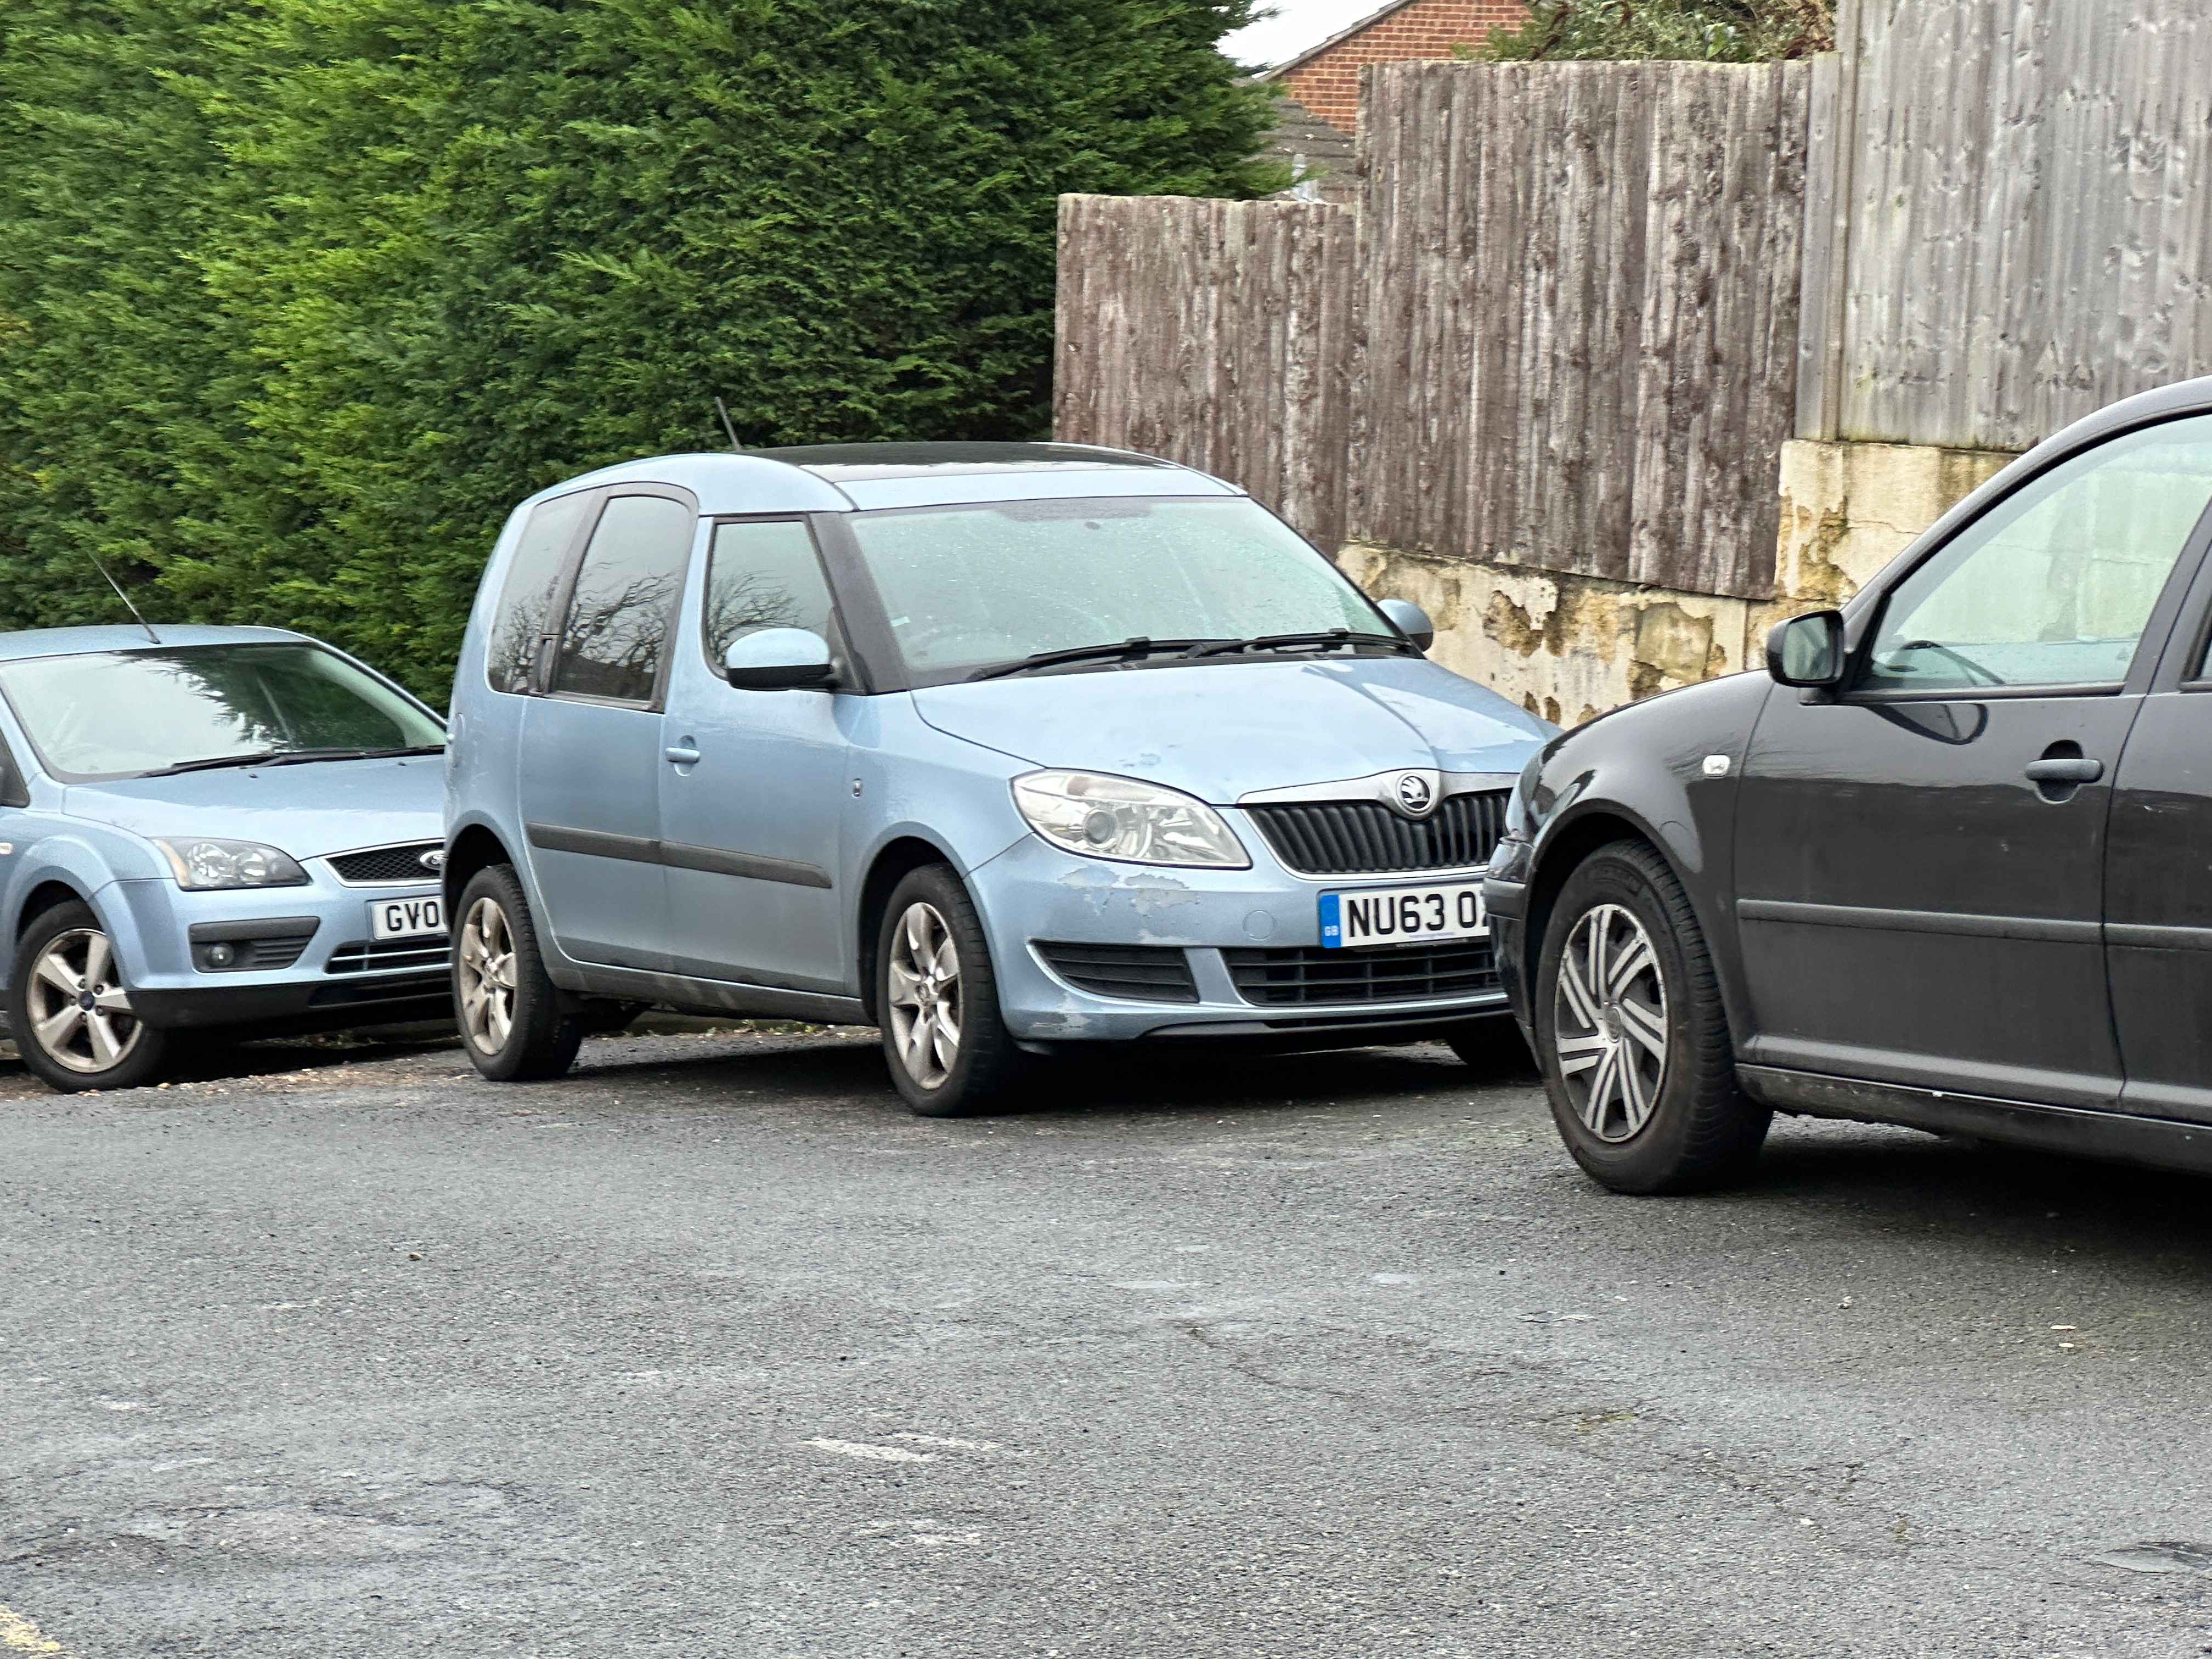 Photograph of NU63 OZB - a Blue Skoda Roomster parked in Hollingdean by a non-resident. The sixteenth of nineteen photographs supplied by the residents of Hollingdean.